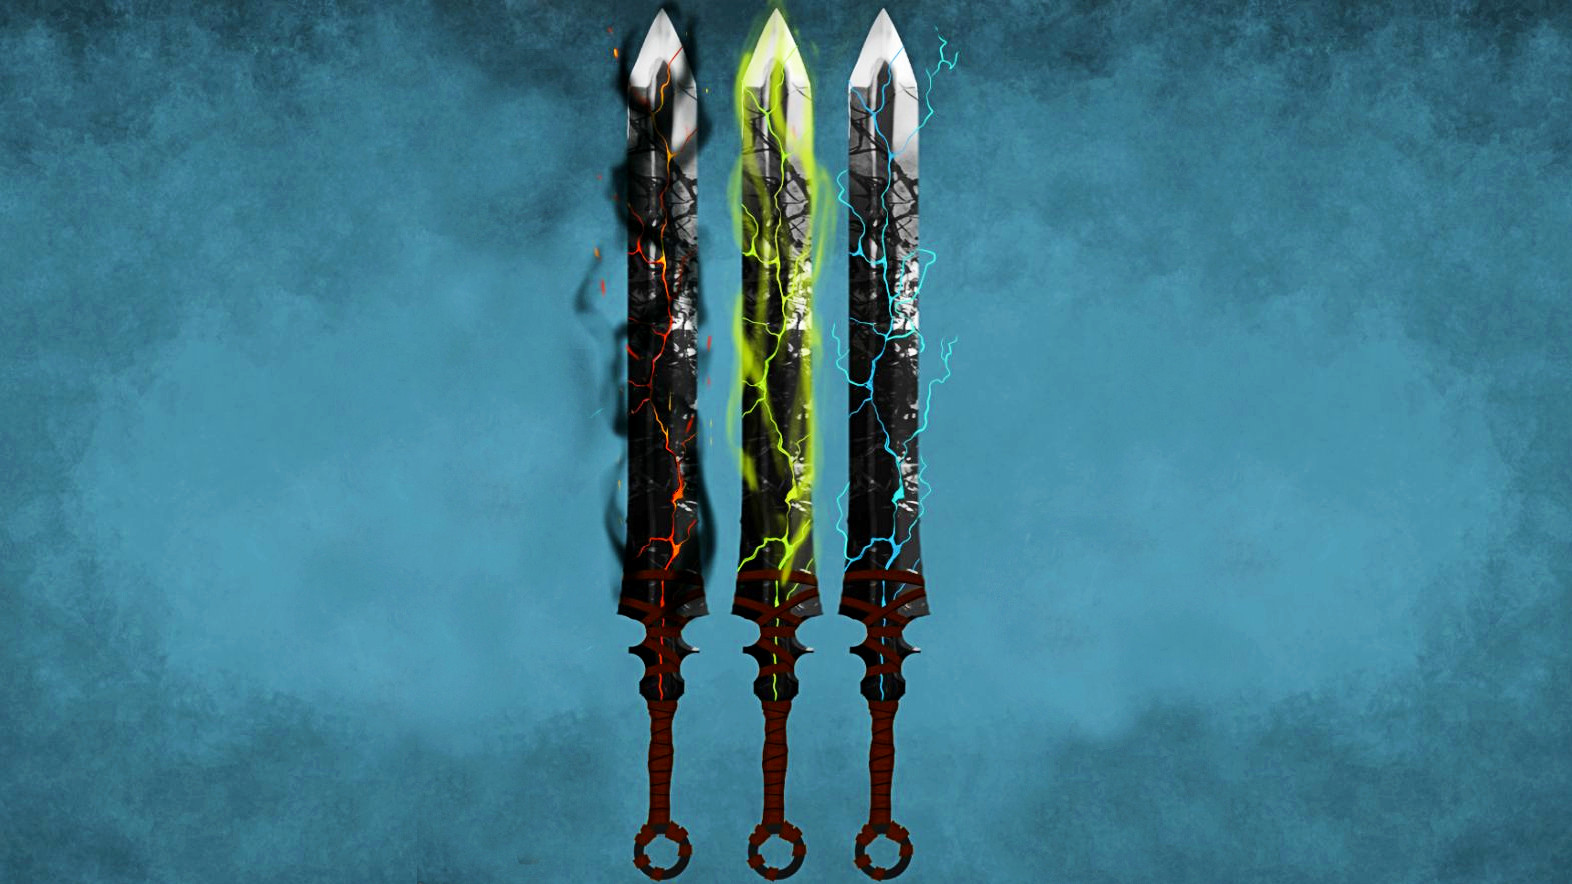 Valheim update shows off various Ashlands weapons concepts